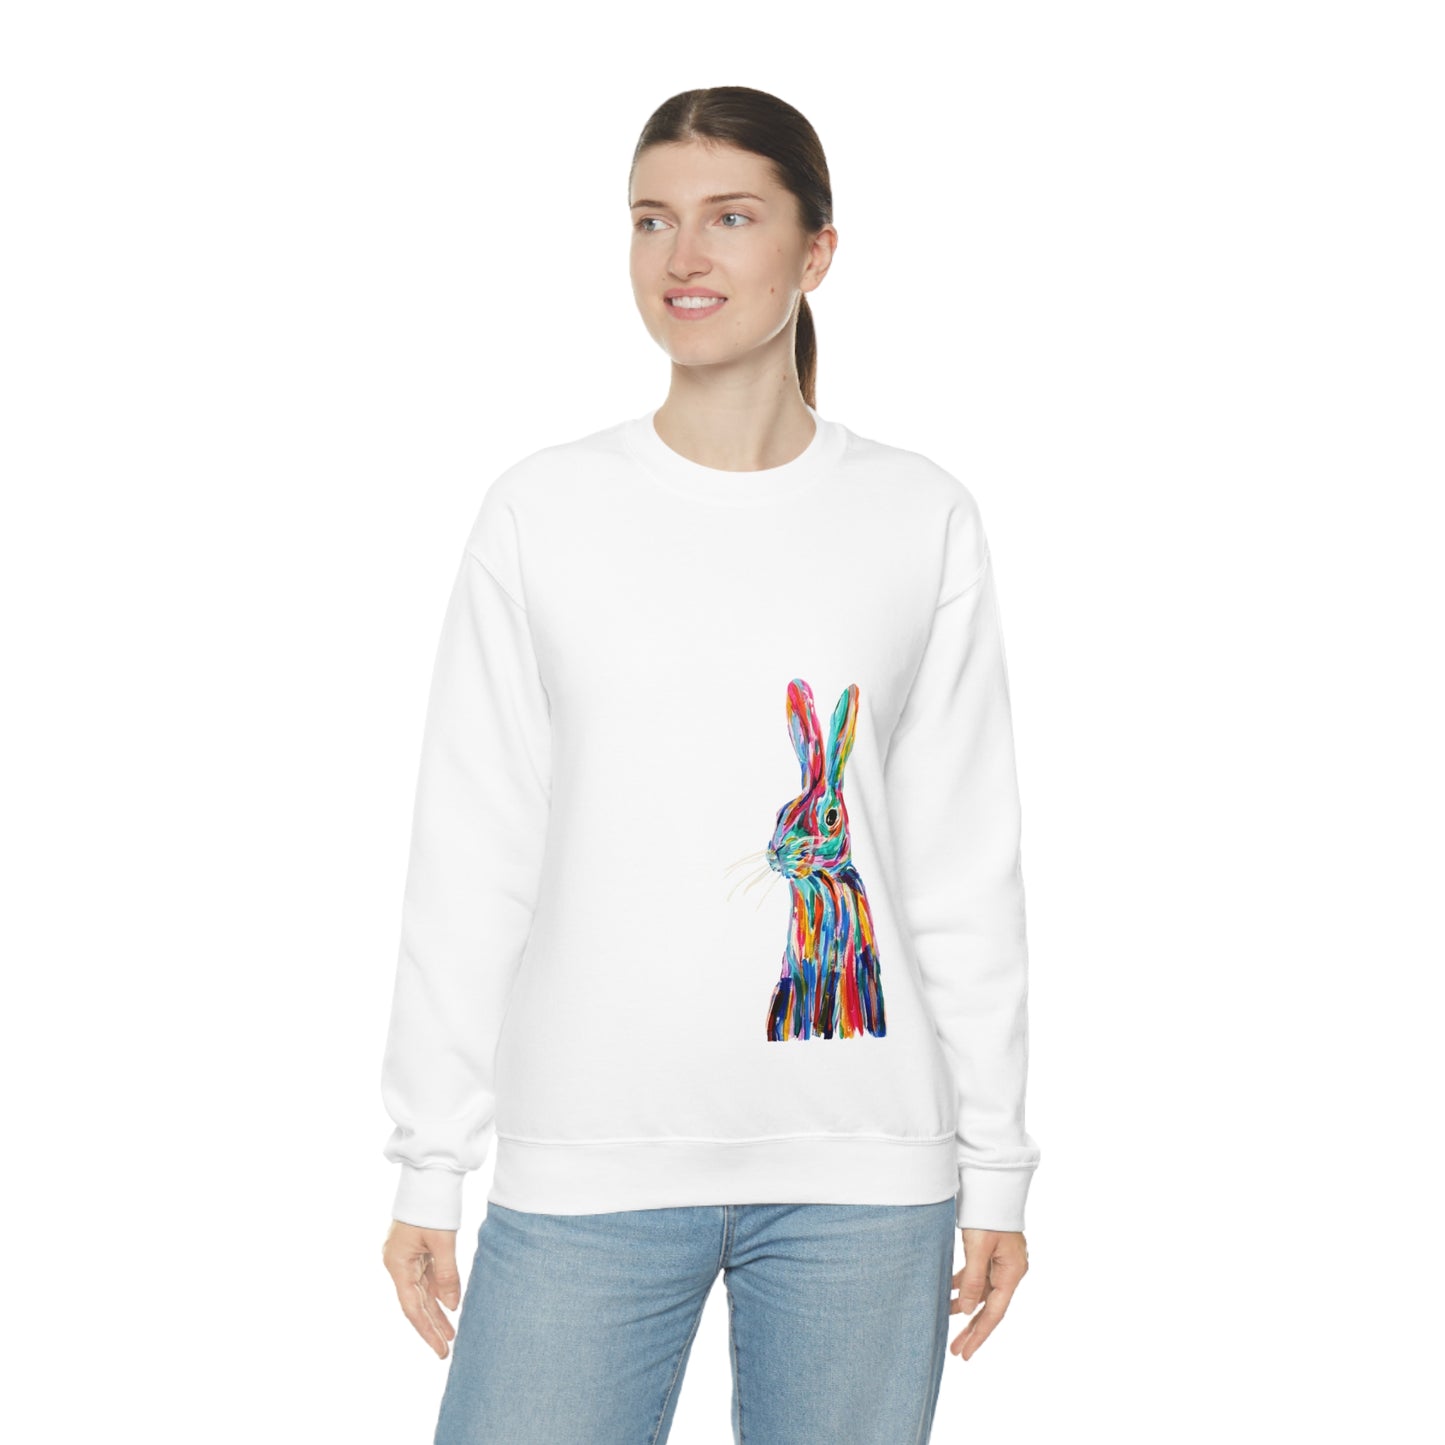 Hand Painted Pop Color Bunny Rabbit Sweatshirt by Madness and Clarity